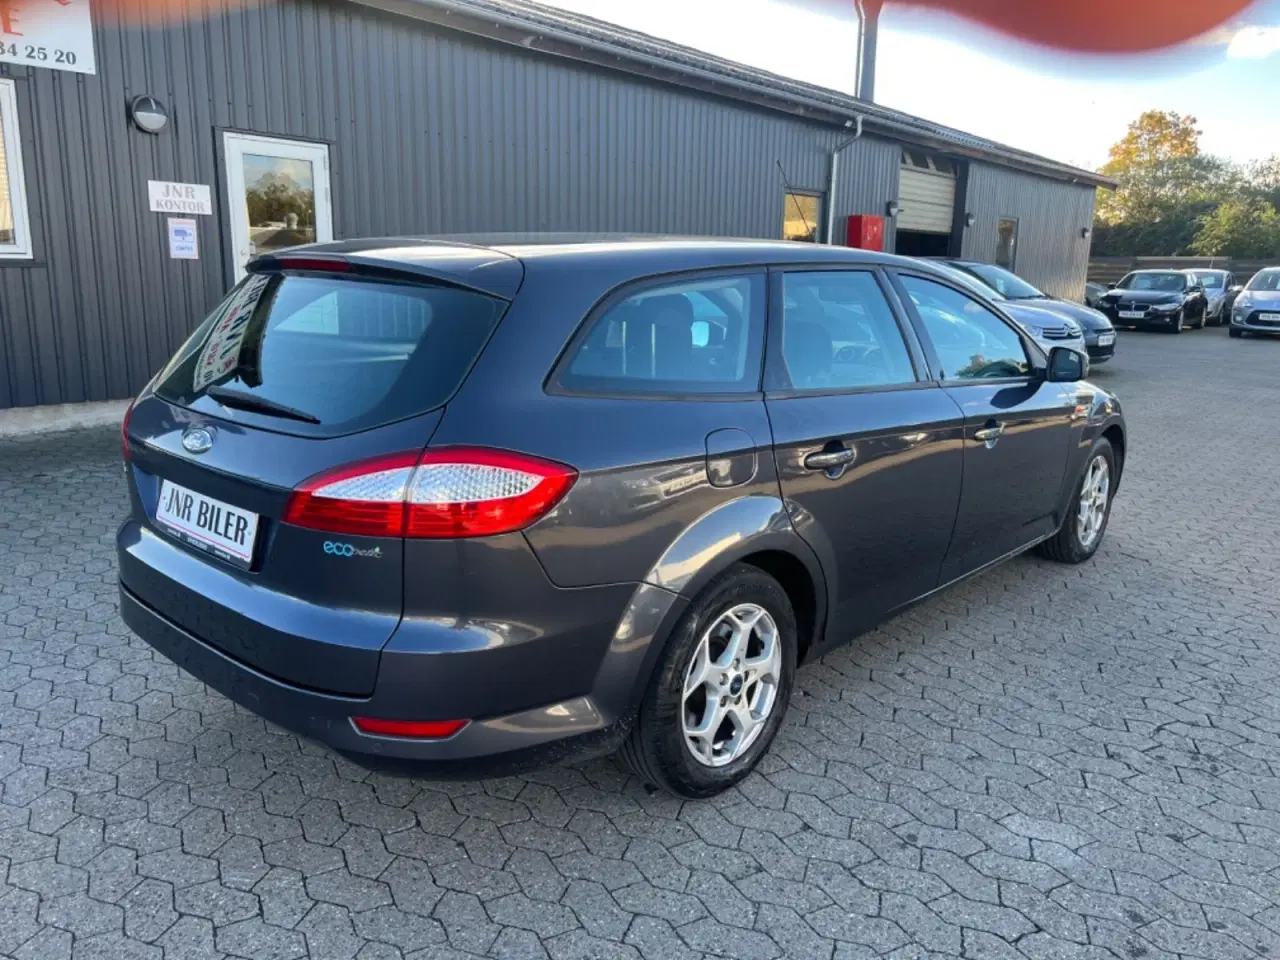 Billede 8 - Ford Mondeo 2,0 TDCi 115 Collection stc. ECO